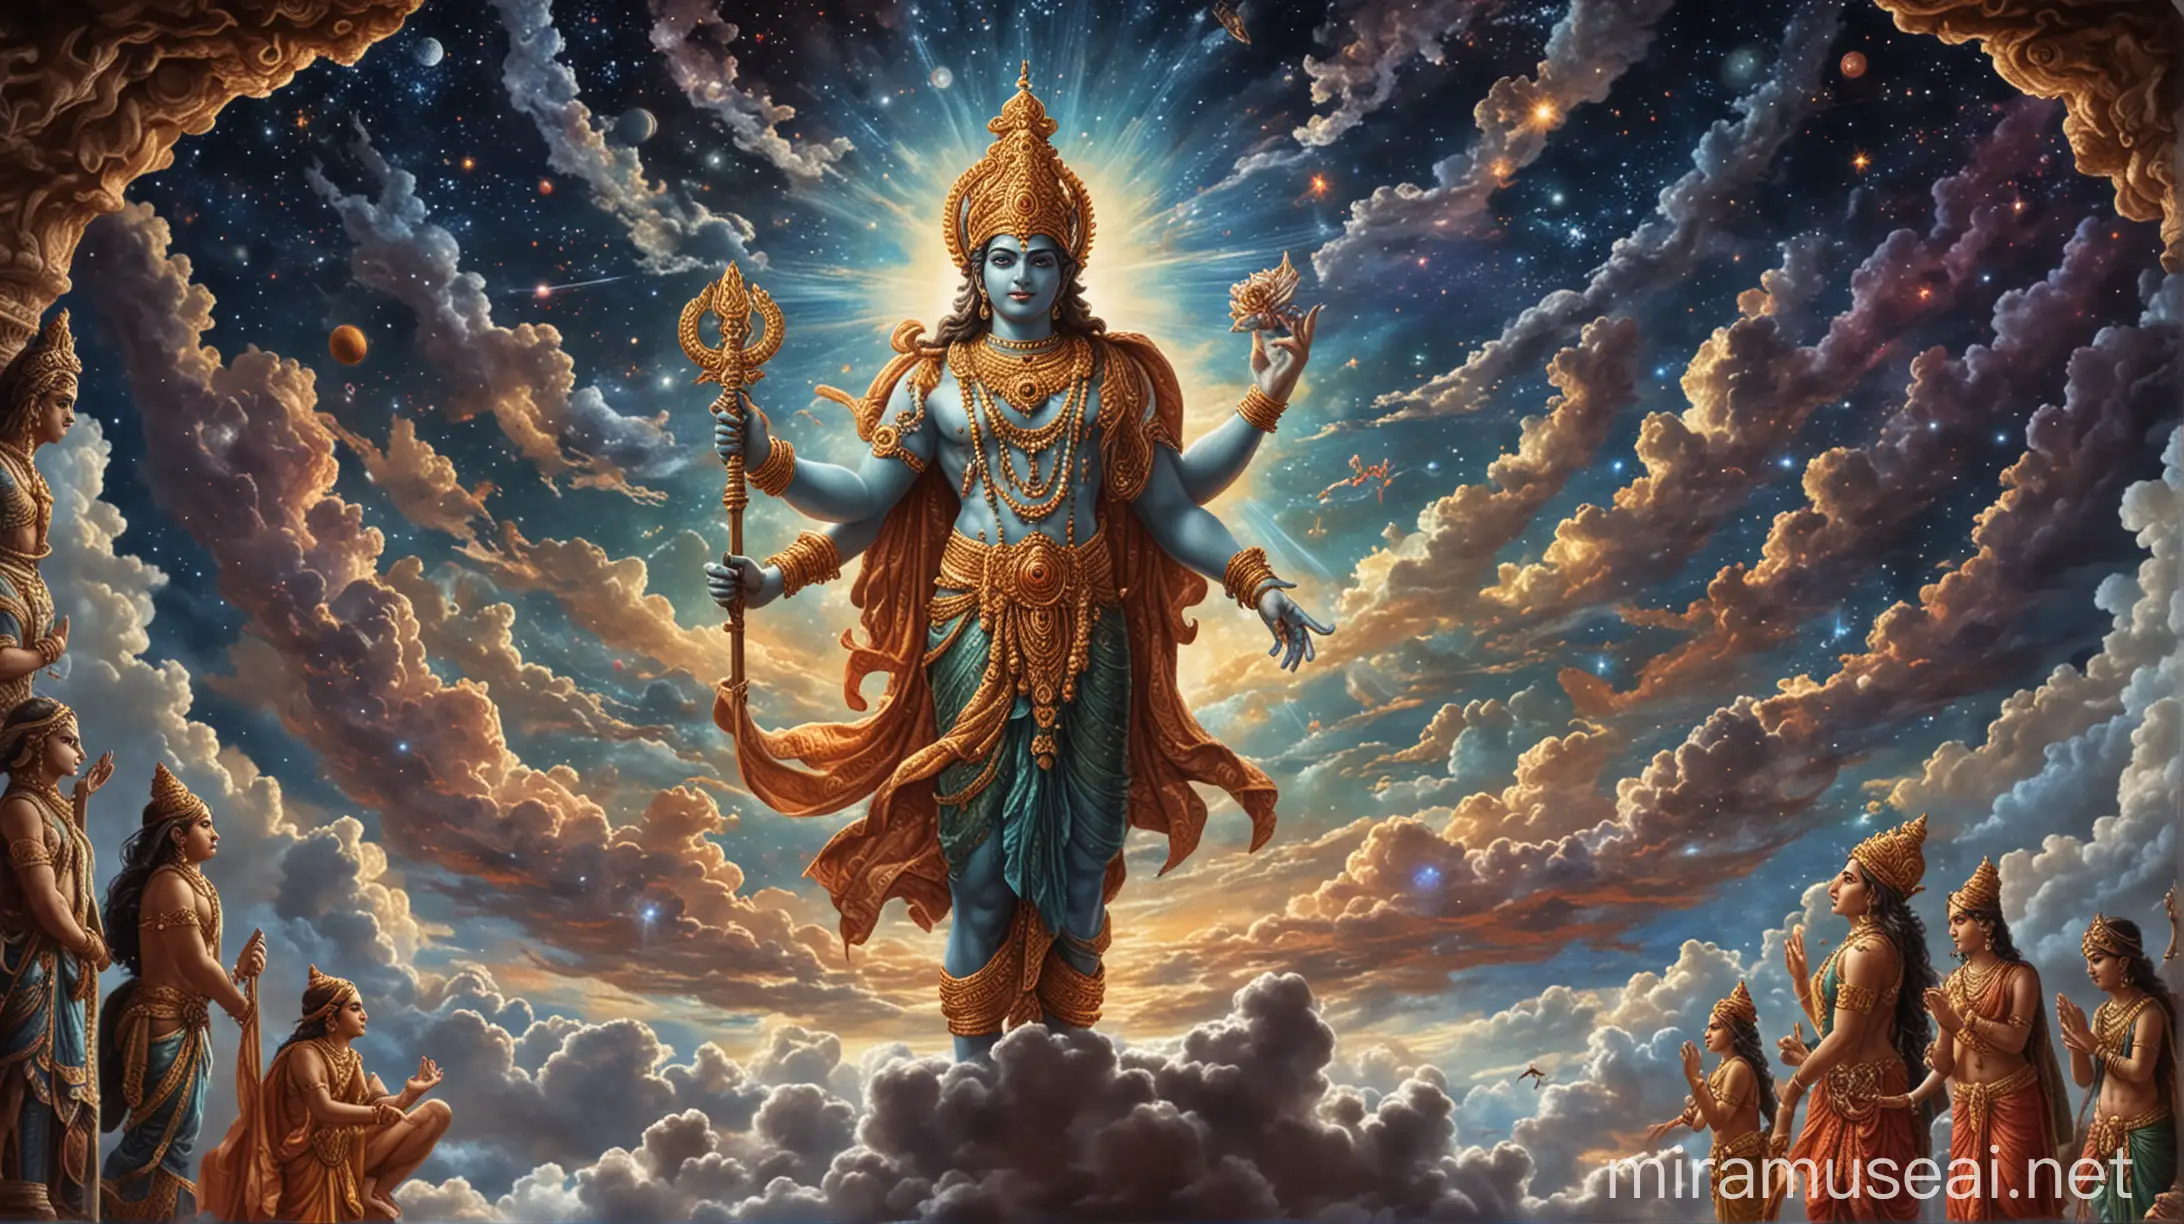 Lord Vishnu overseeing the Universe Sky haven lot of Universe